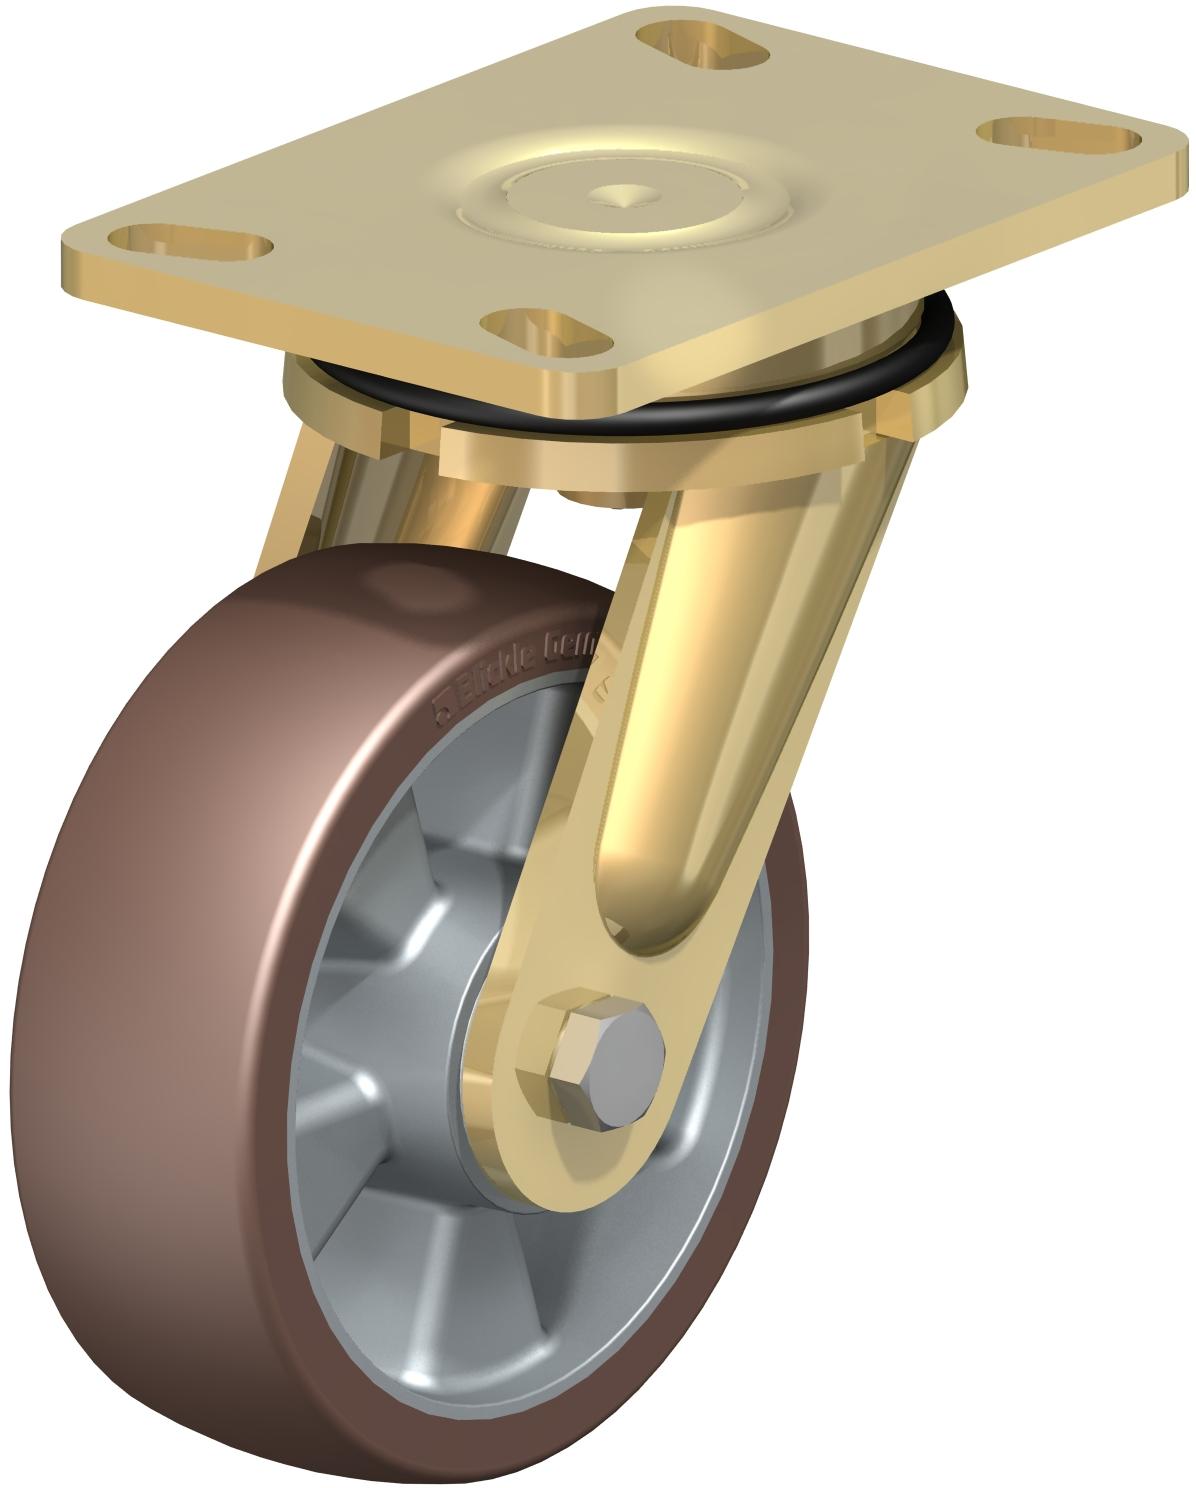 Extra Heavy Duty Top Plate Casters - Swivel, Ball Bearing, Blickle Besthane Brown Polyurethane Tread On Aluminum Core Wheel